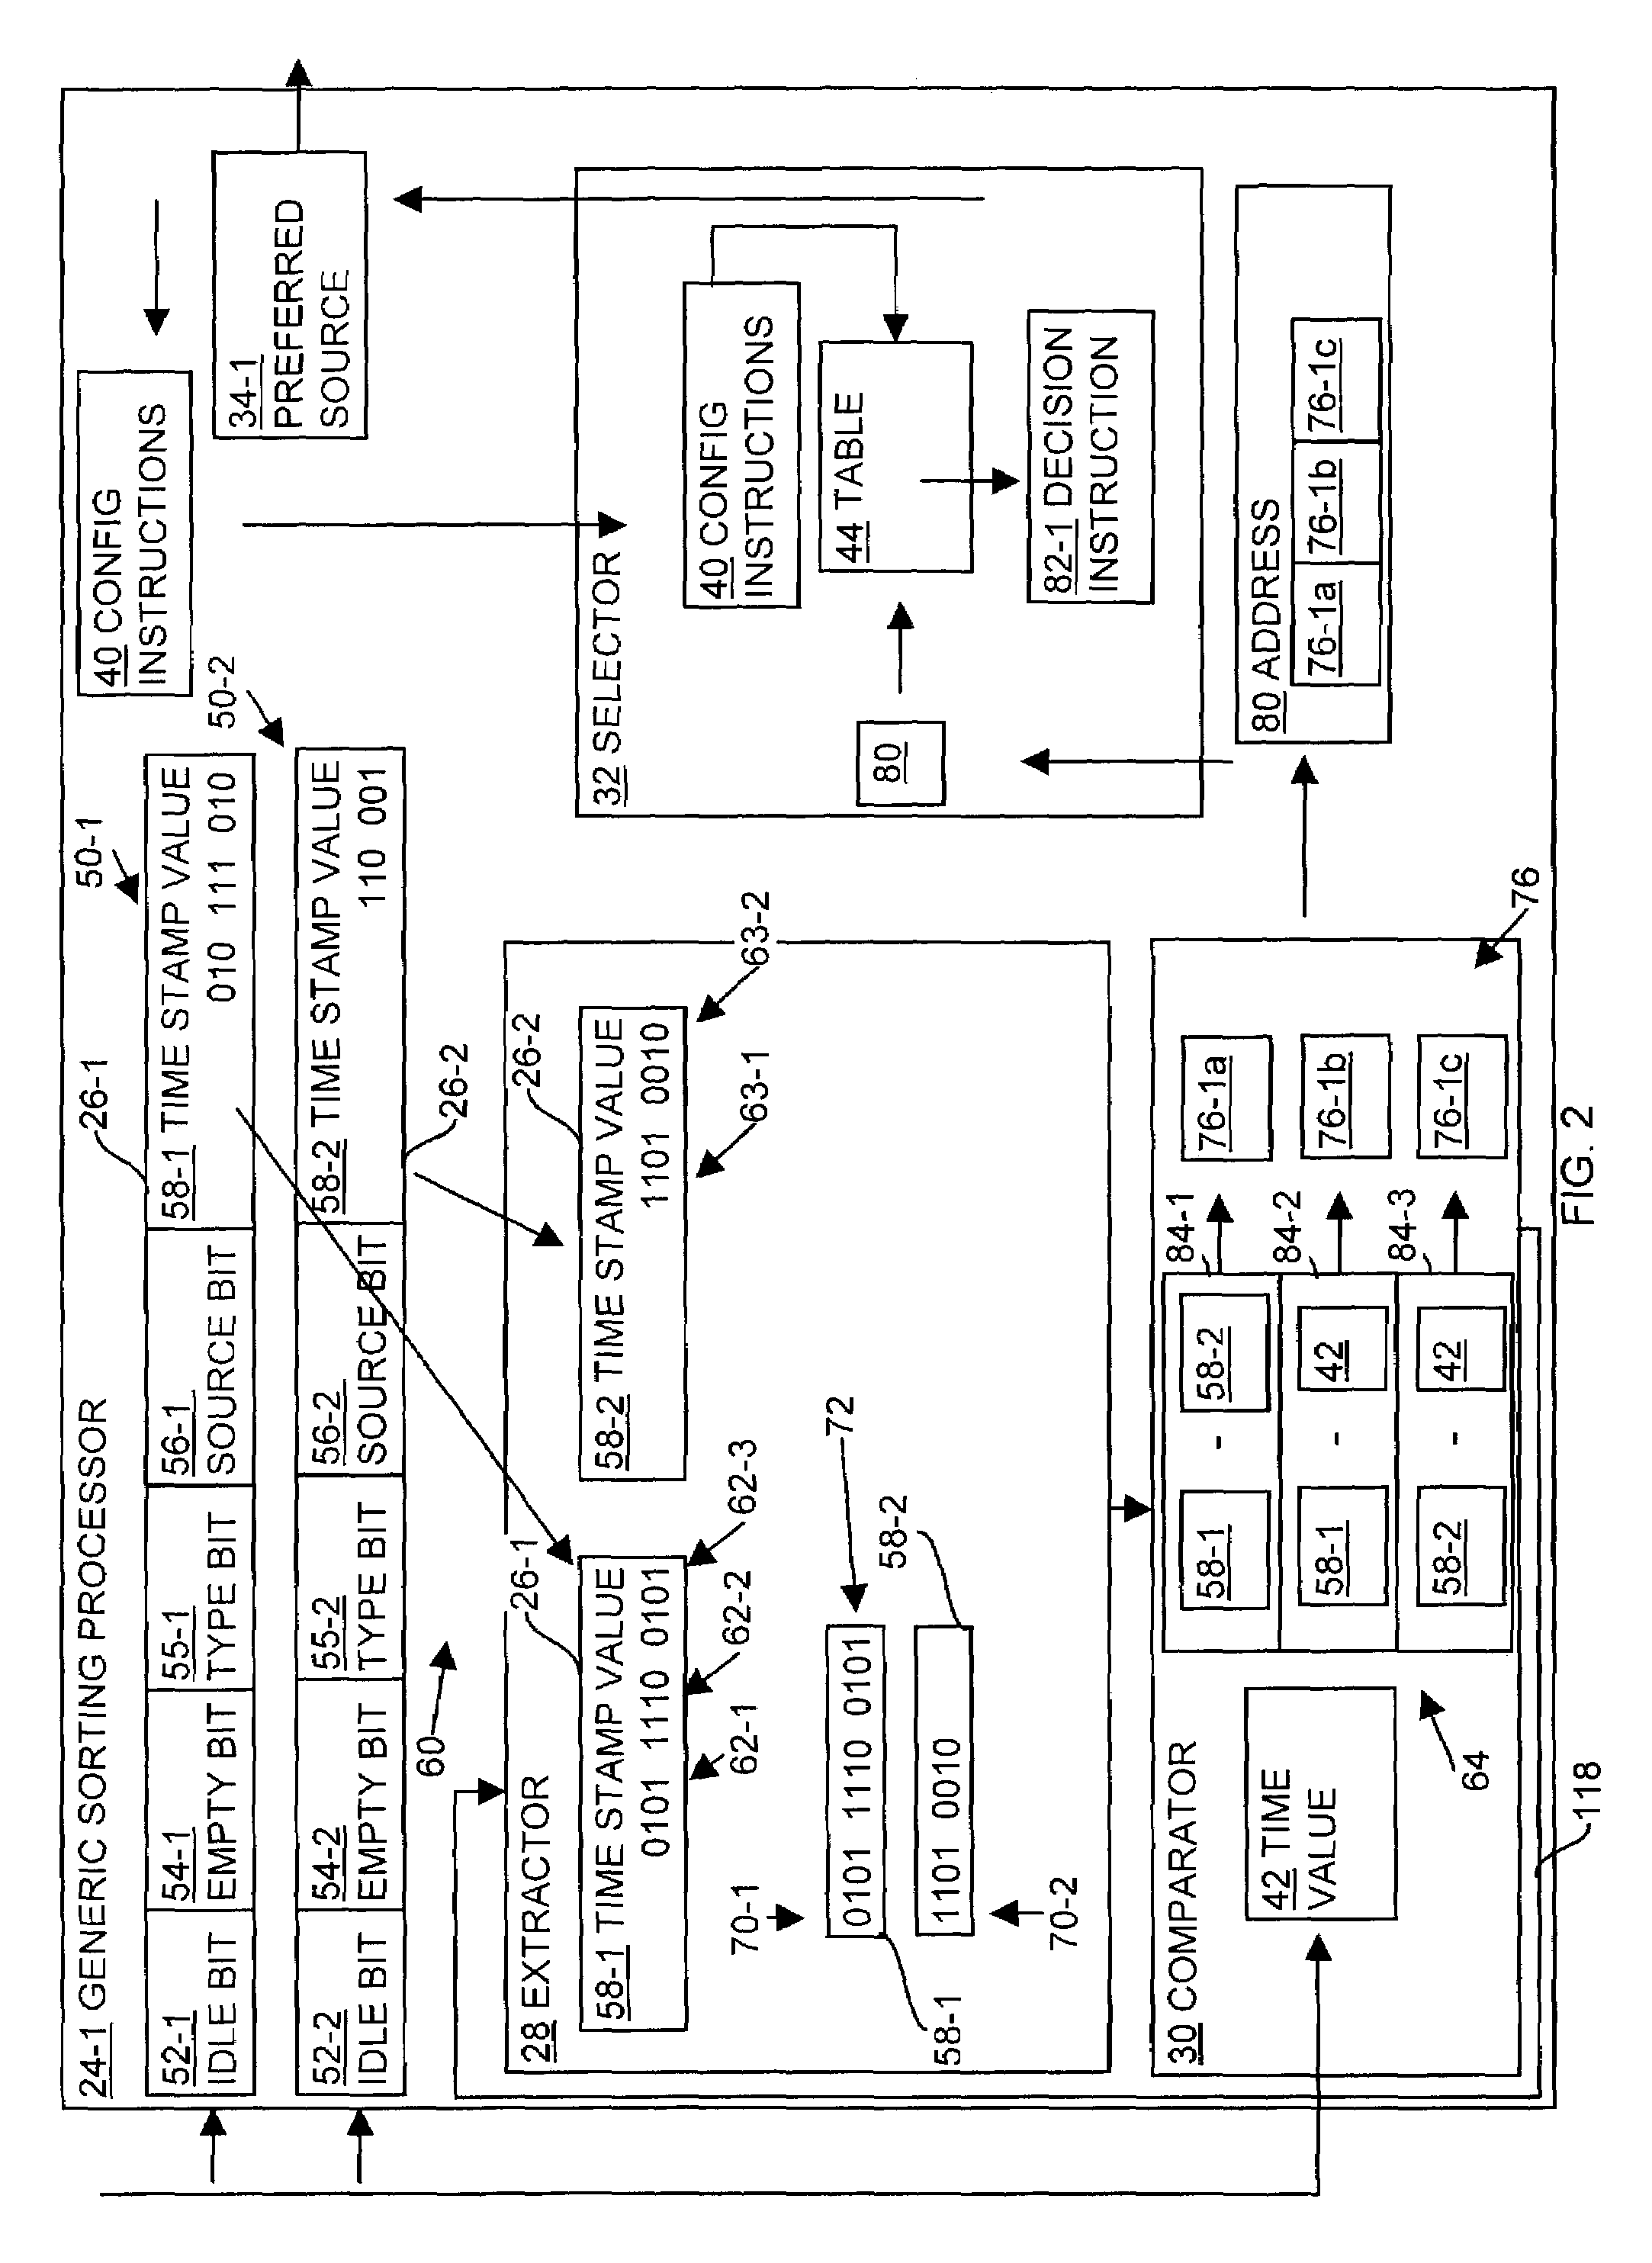 Methods and apparatus for scheduling operation of a data source